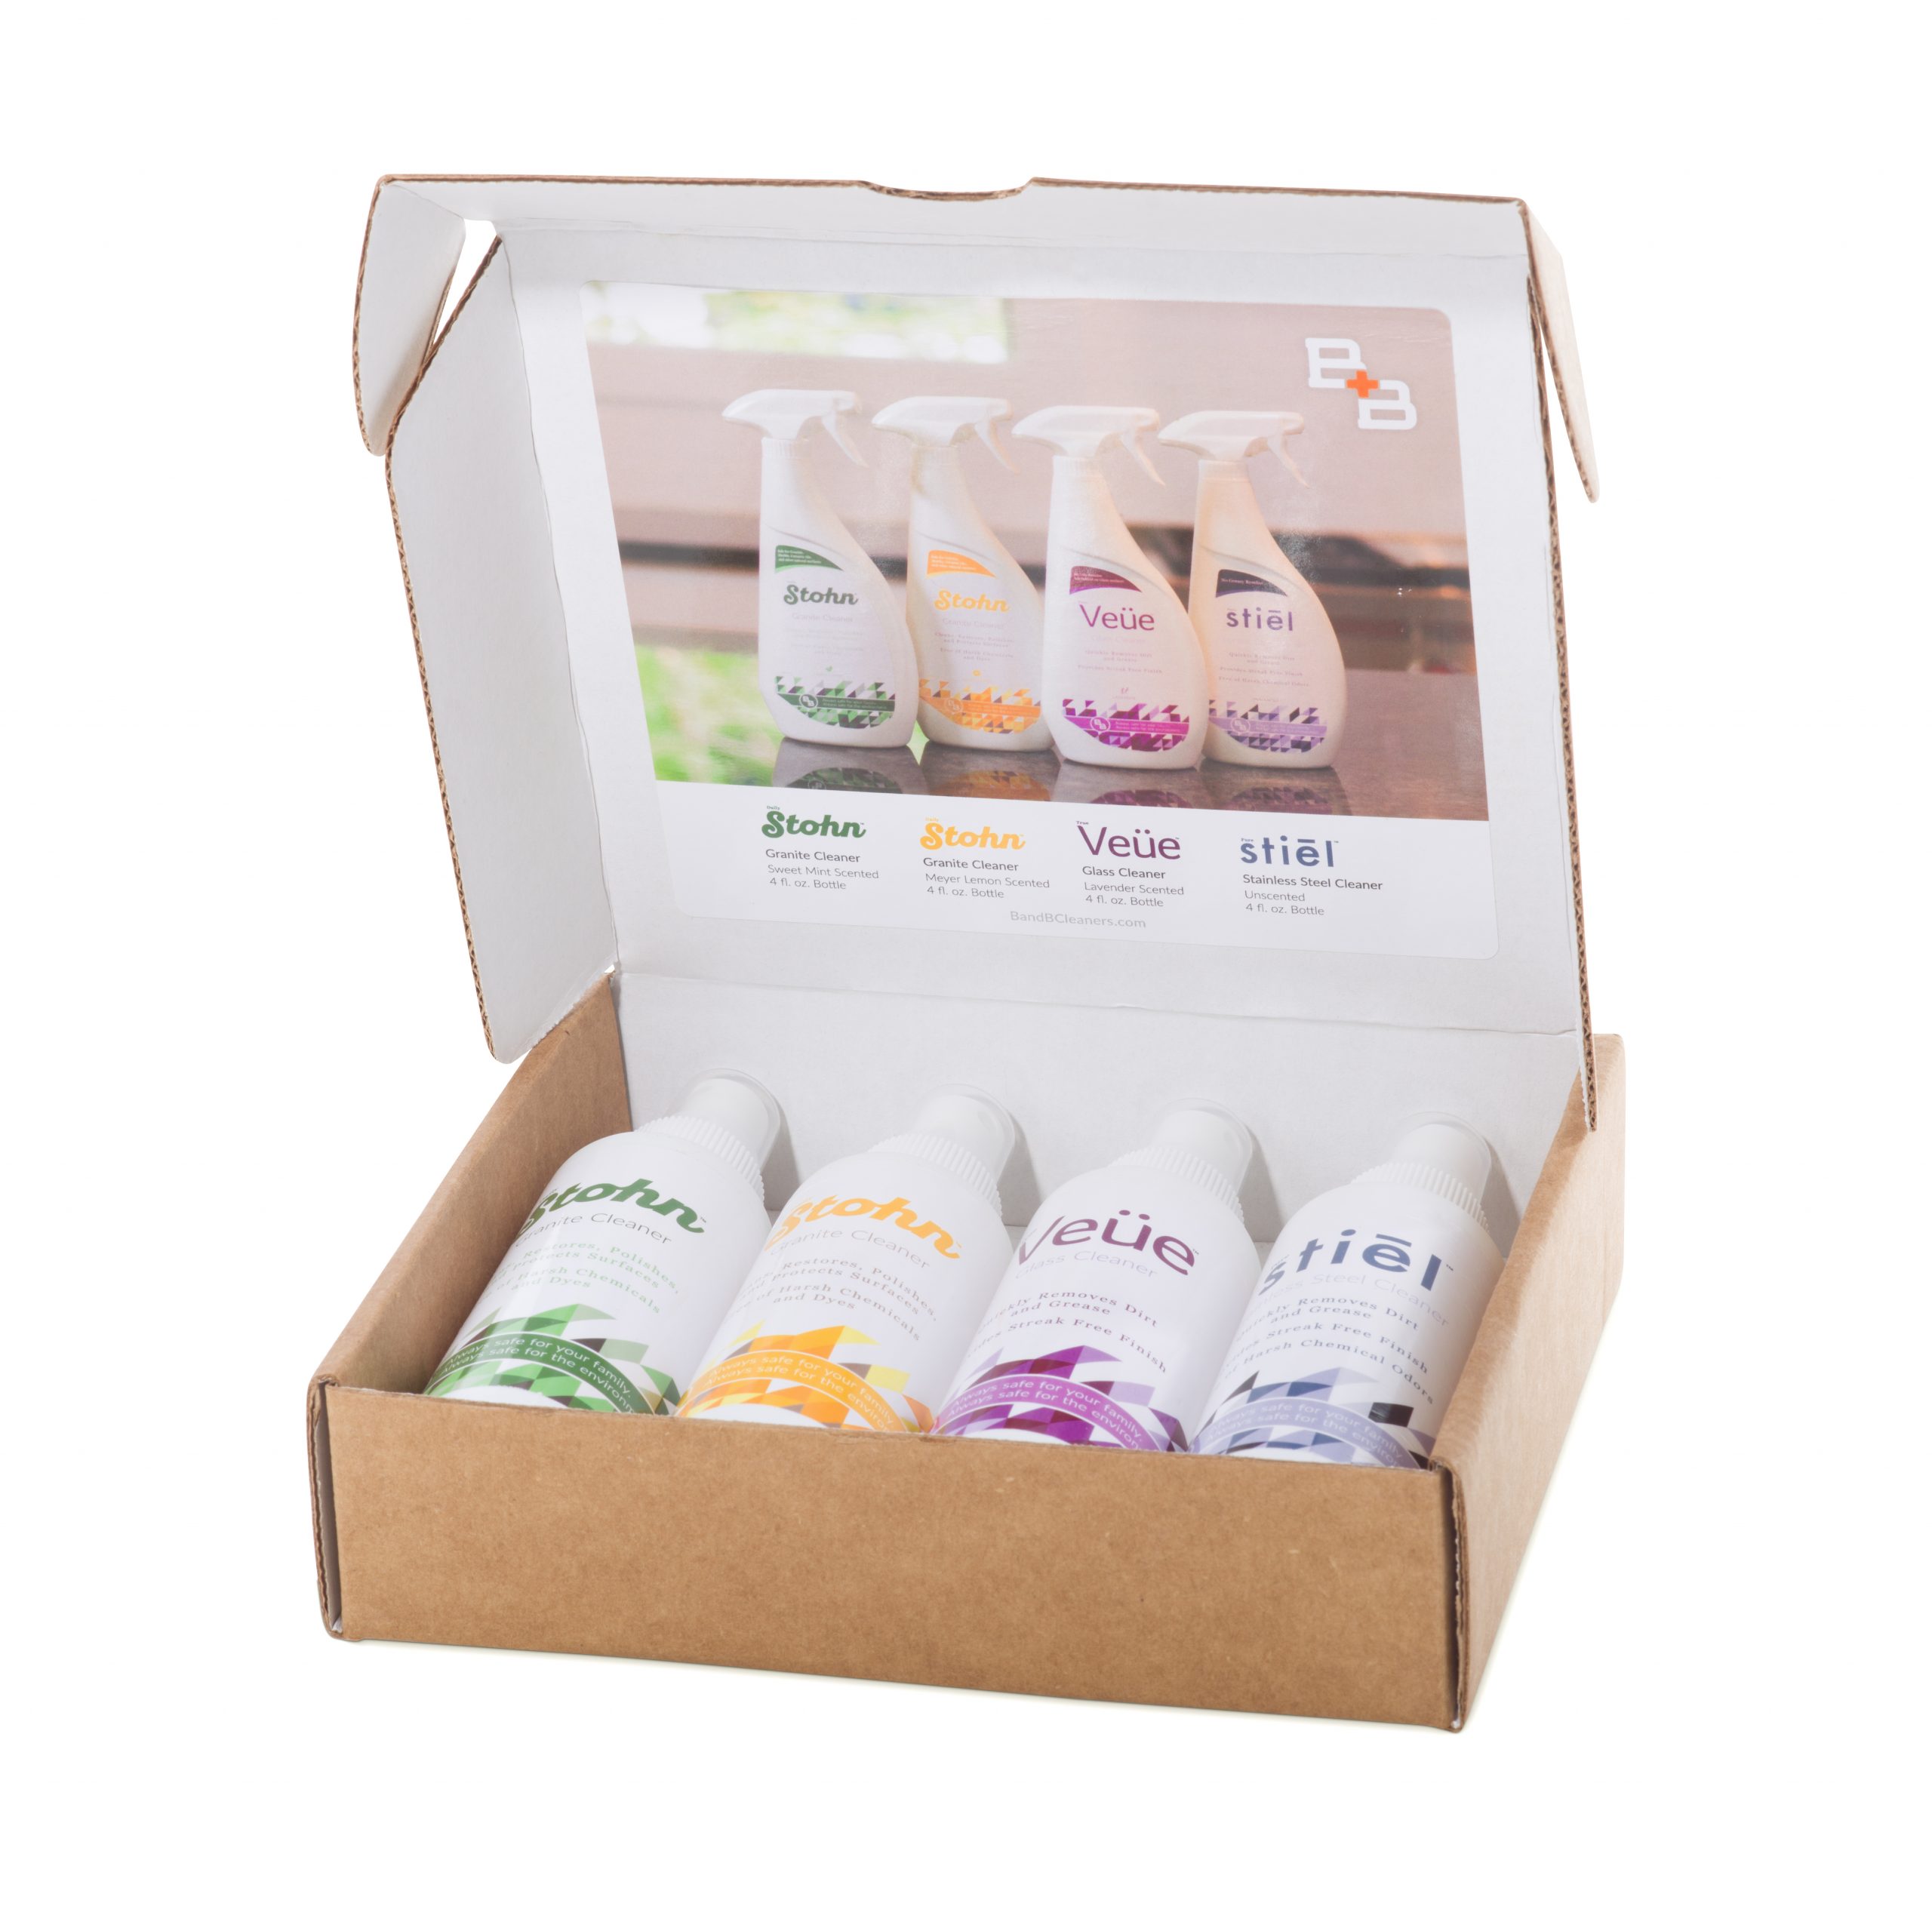 Cleaning product sample box